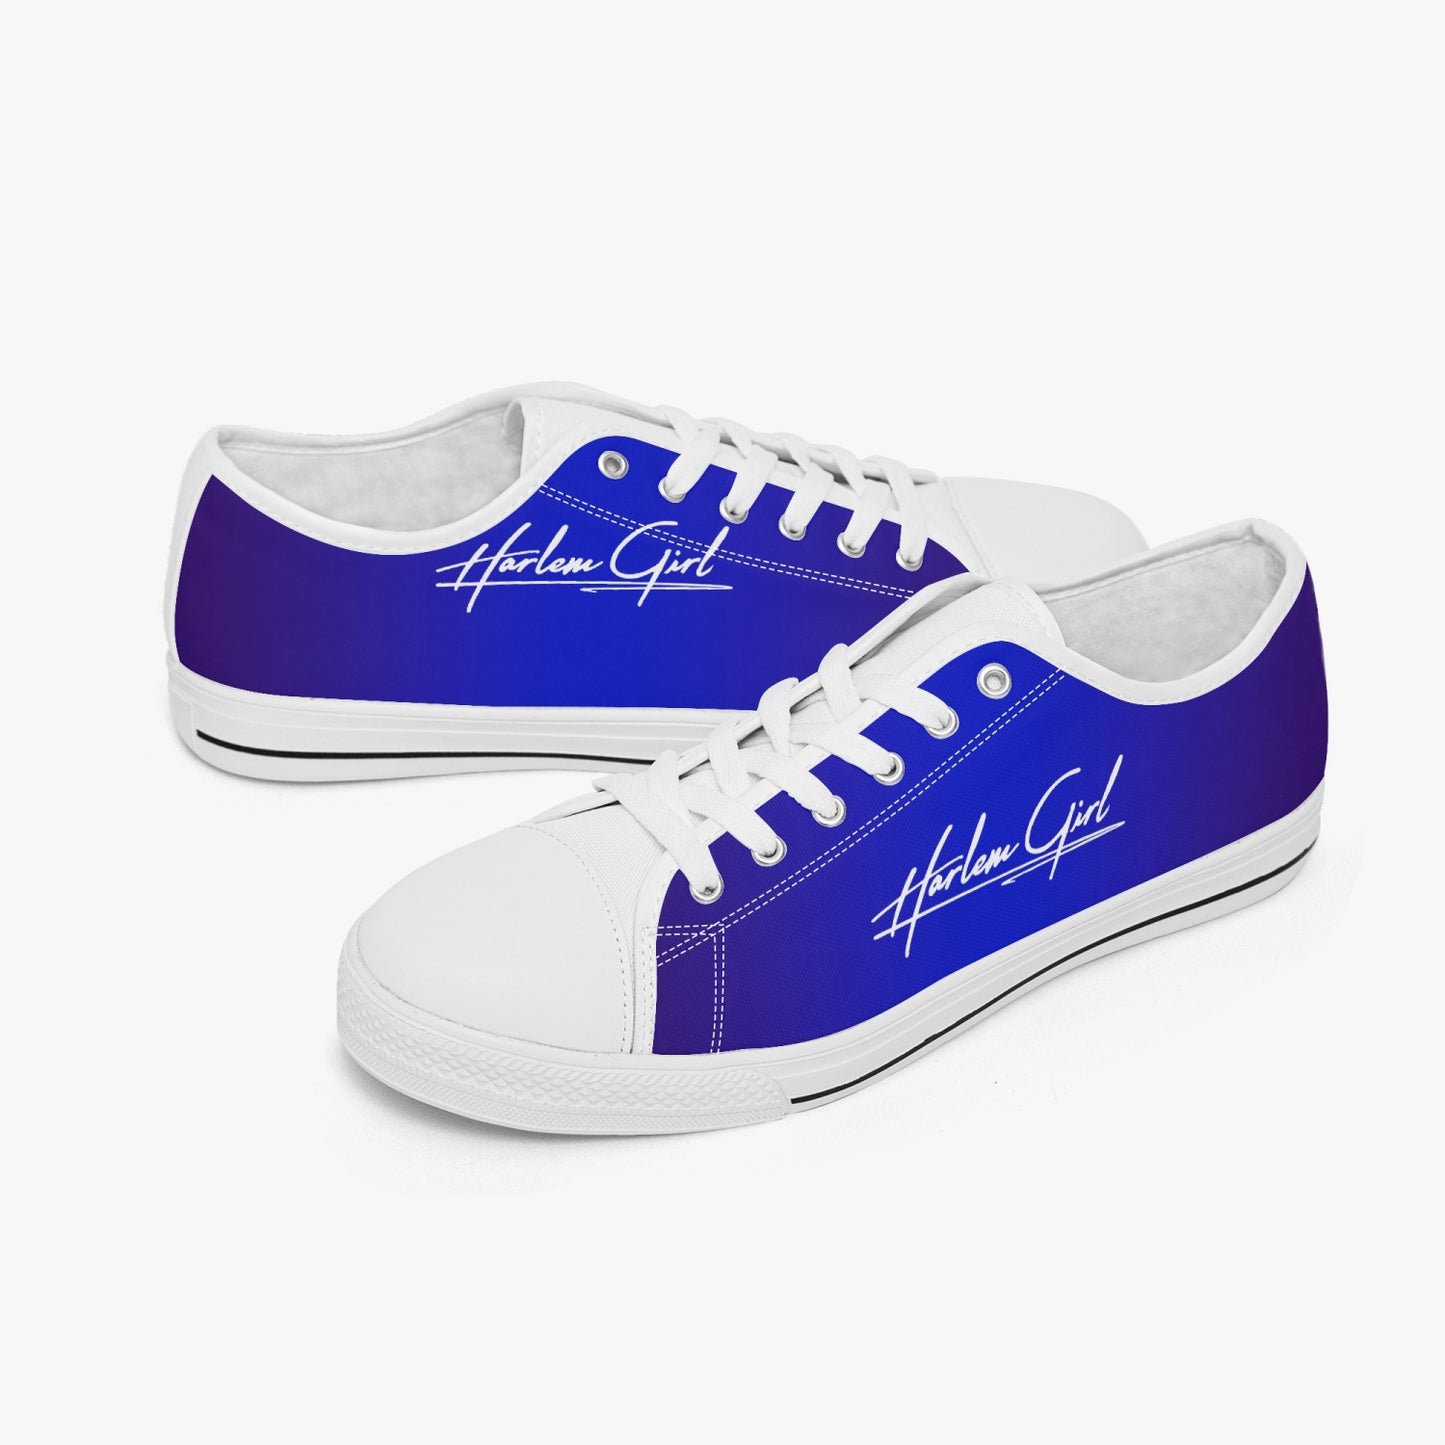 Harlem Girl "Coolee High" Womens Low-Top Canvas Sneaks - Sapphire